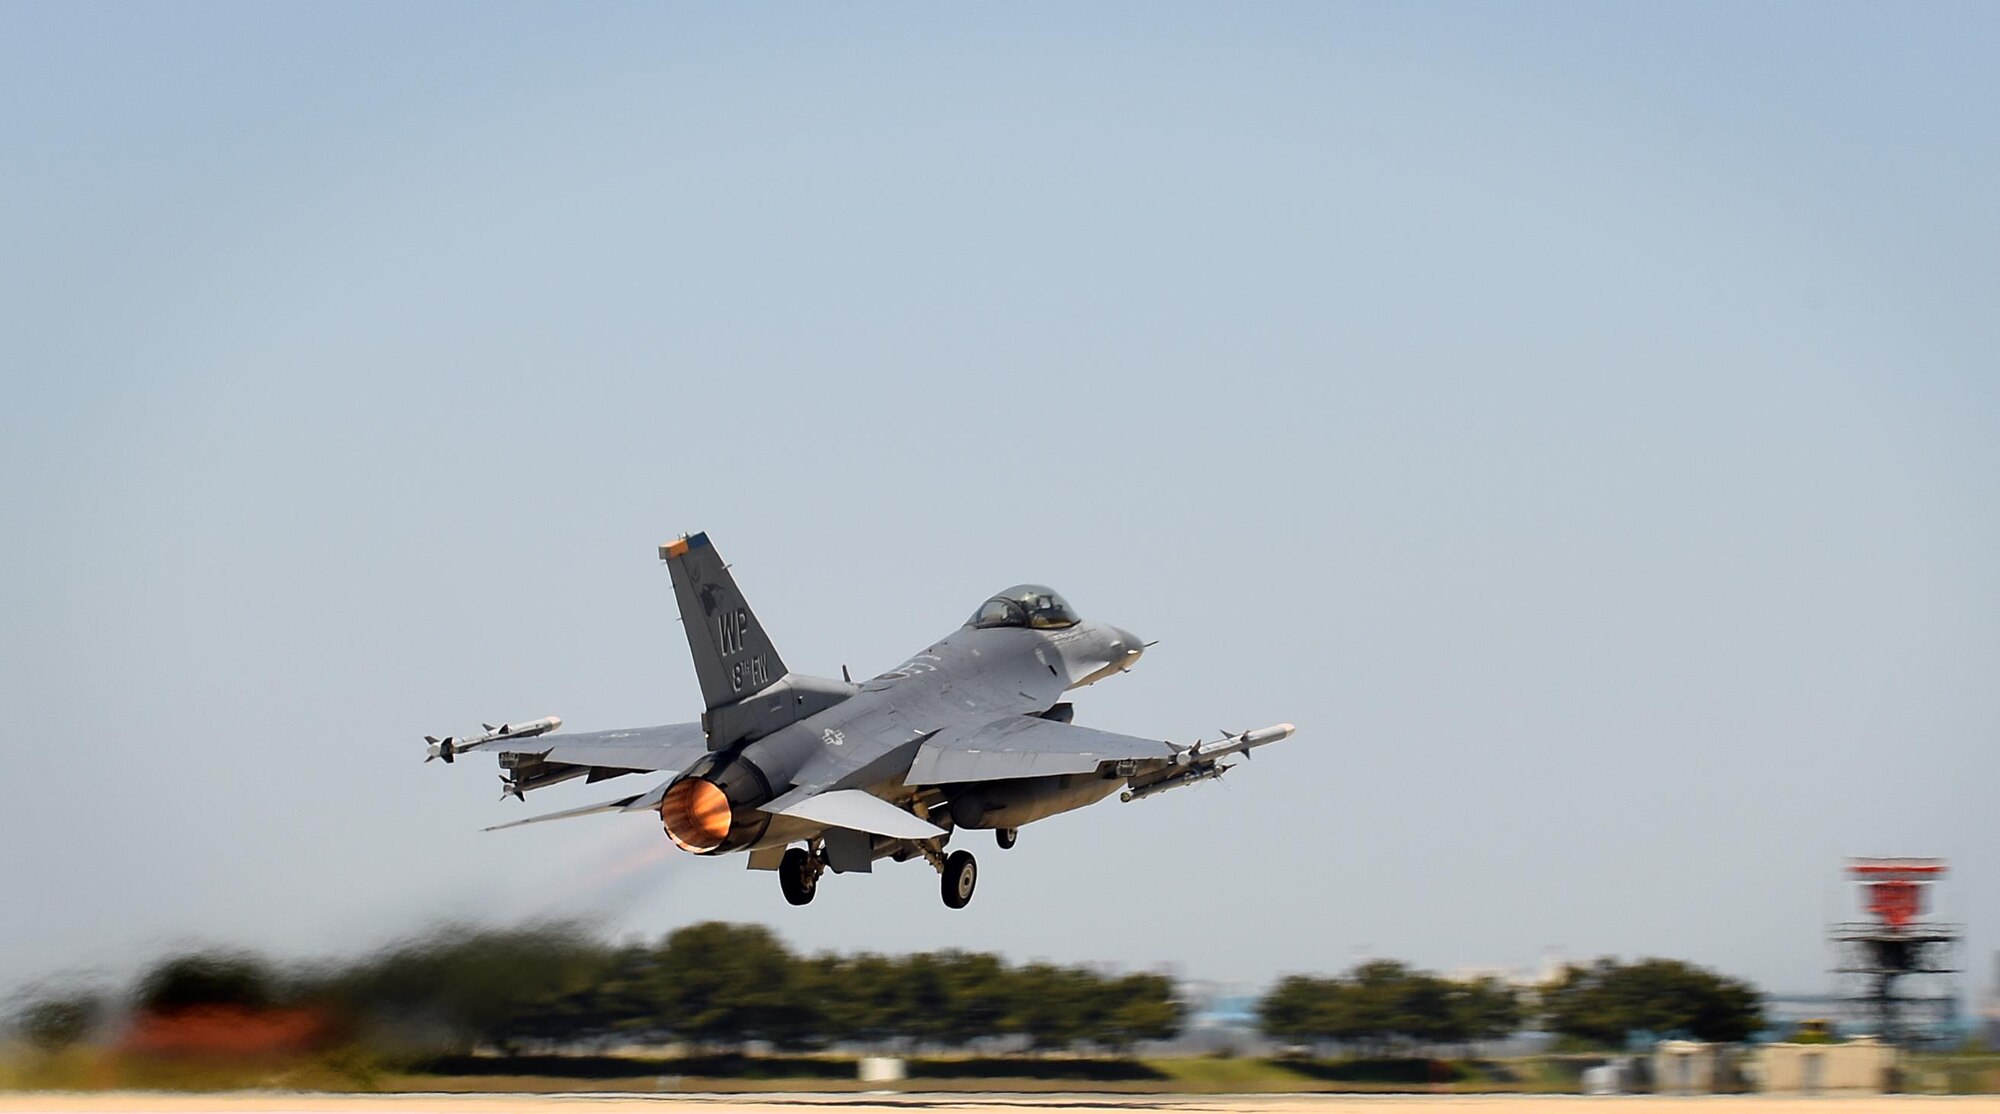 A U.S. Air Force F-16 Fighting Falcon takes off during Exercise MAX THUNDER 17 at Kunsan Air Base, Republic of Korea, April 27, 2017. Max Thunder is a regularly scheduled training exercise designed to enhance the readiness of U.S. and ROK forces to defend the Republic of Korea. (U.S. Air Force photo by Tech. Sgt. Jeff Andrejcik/Released) 